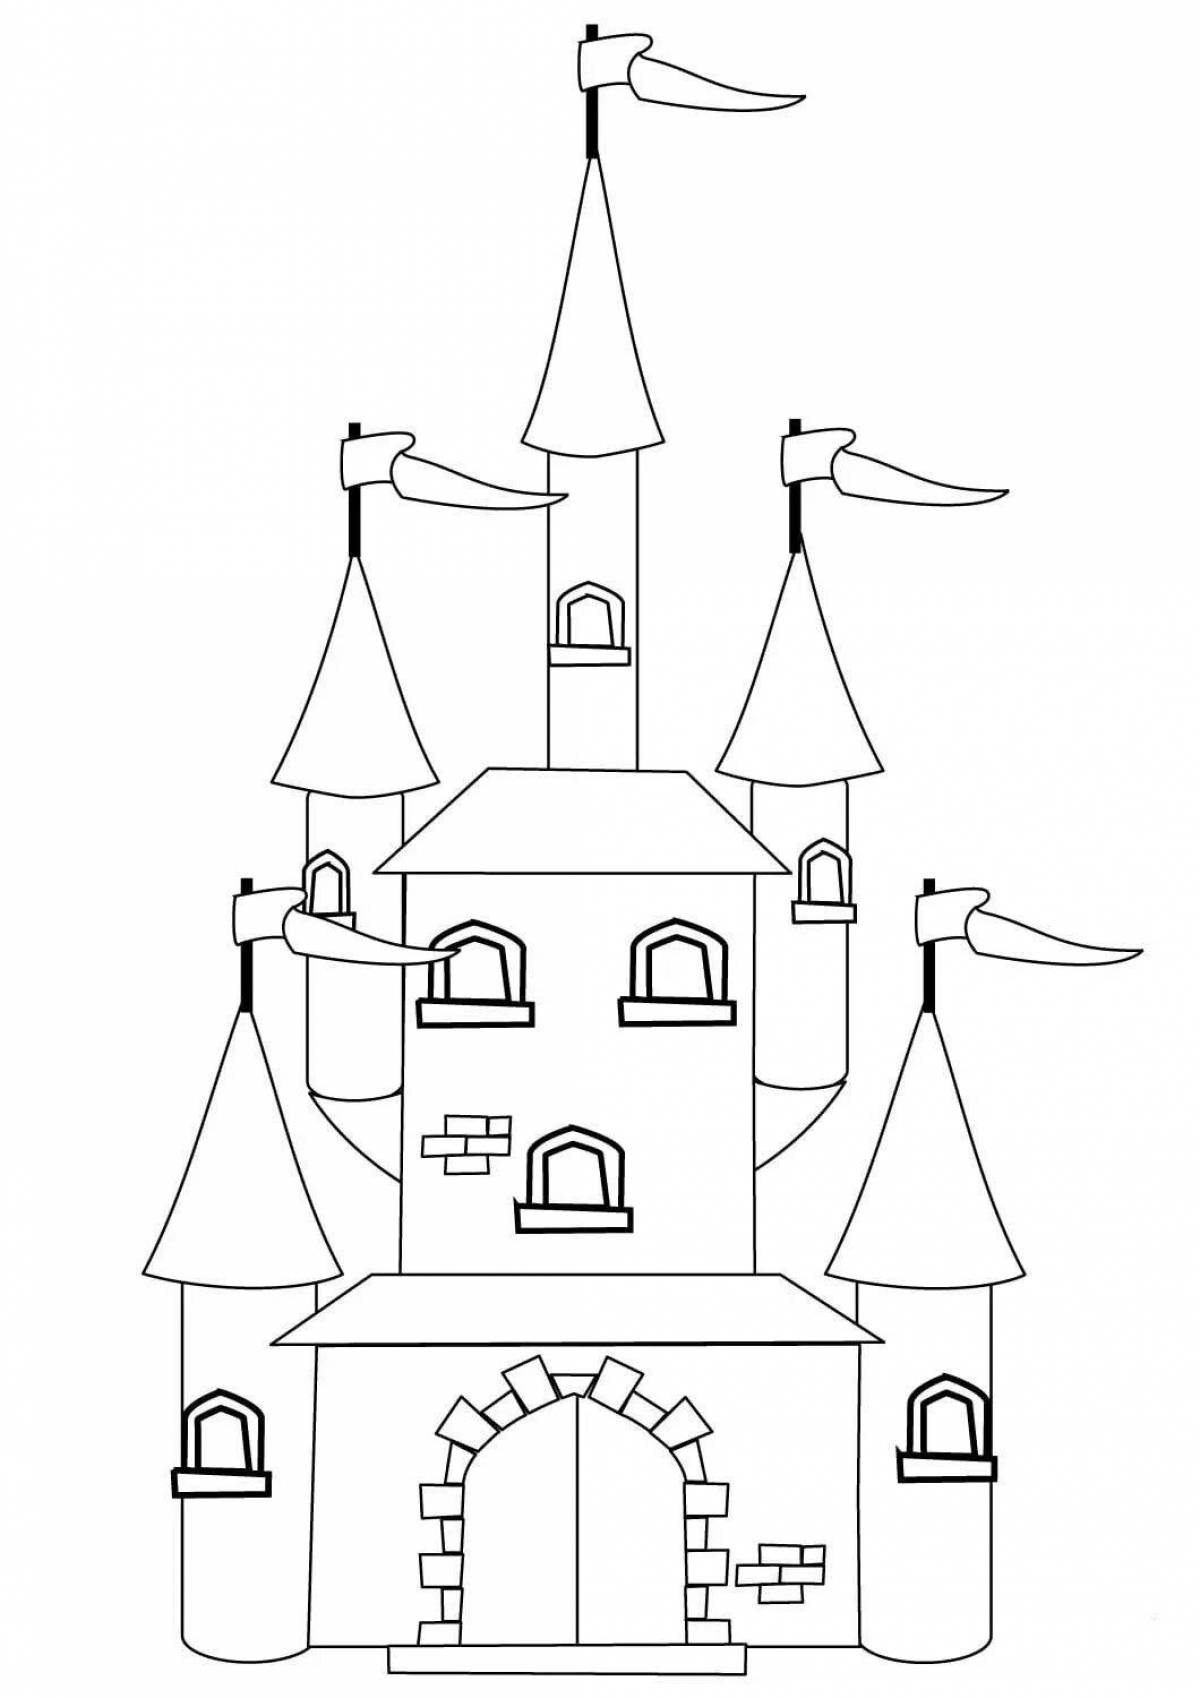 Splendid palace coloring pages for kids